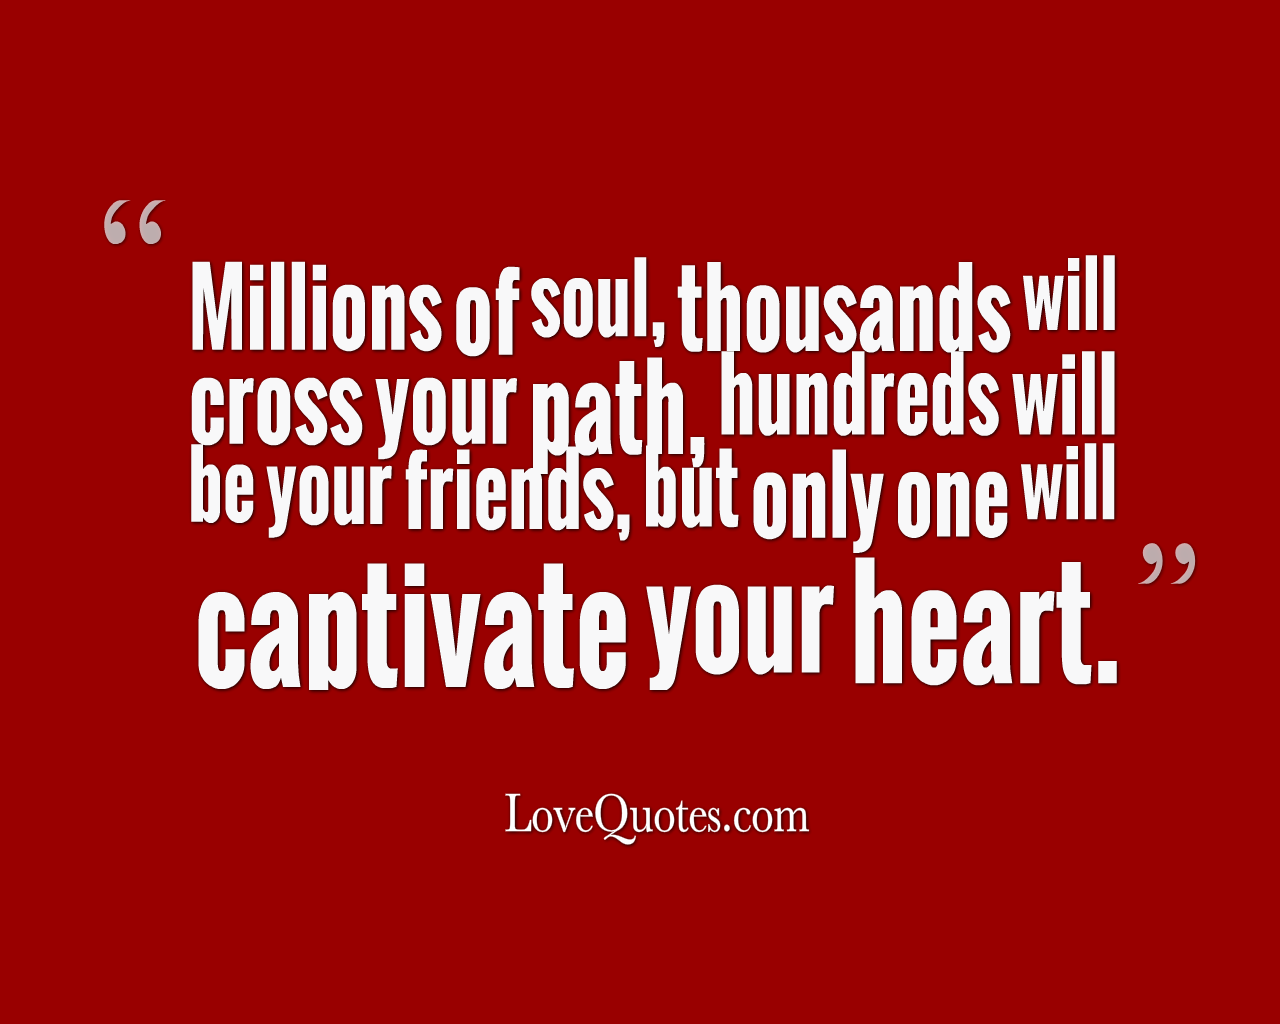 Captivate Your Heart